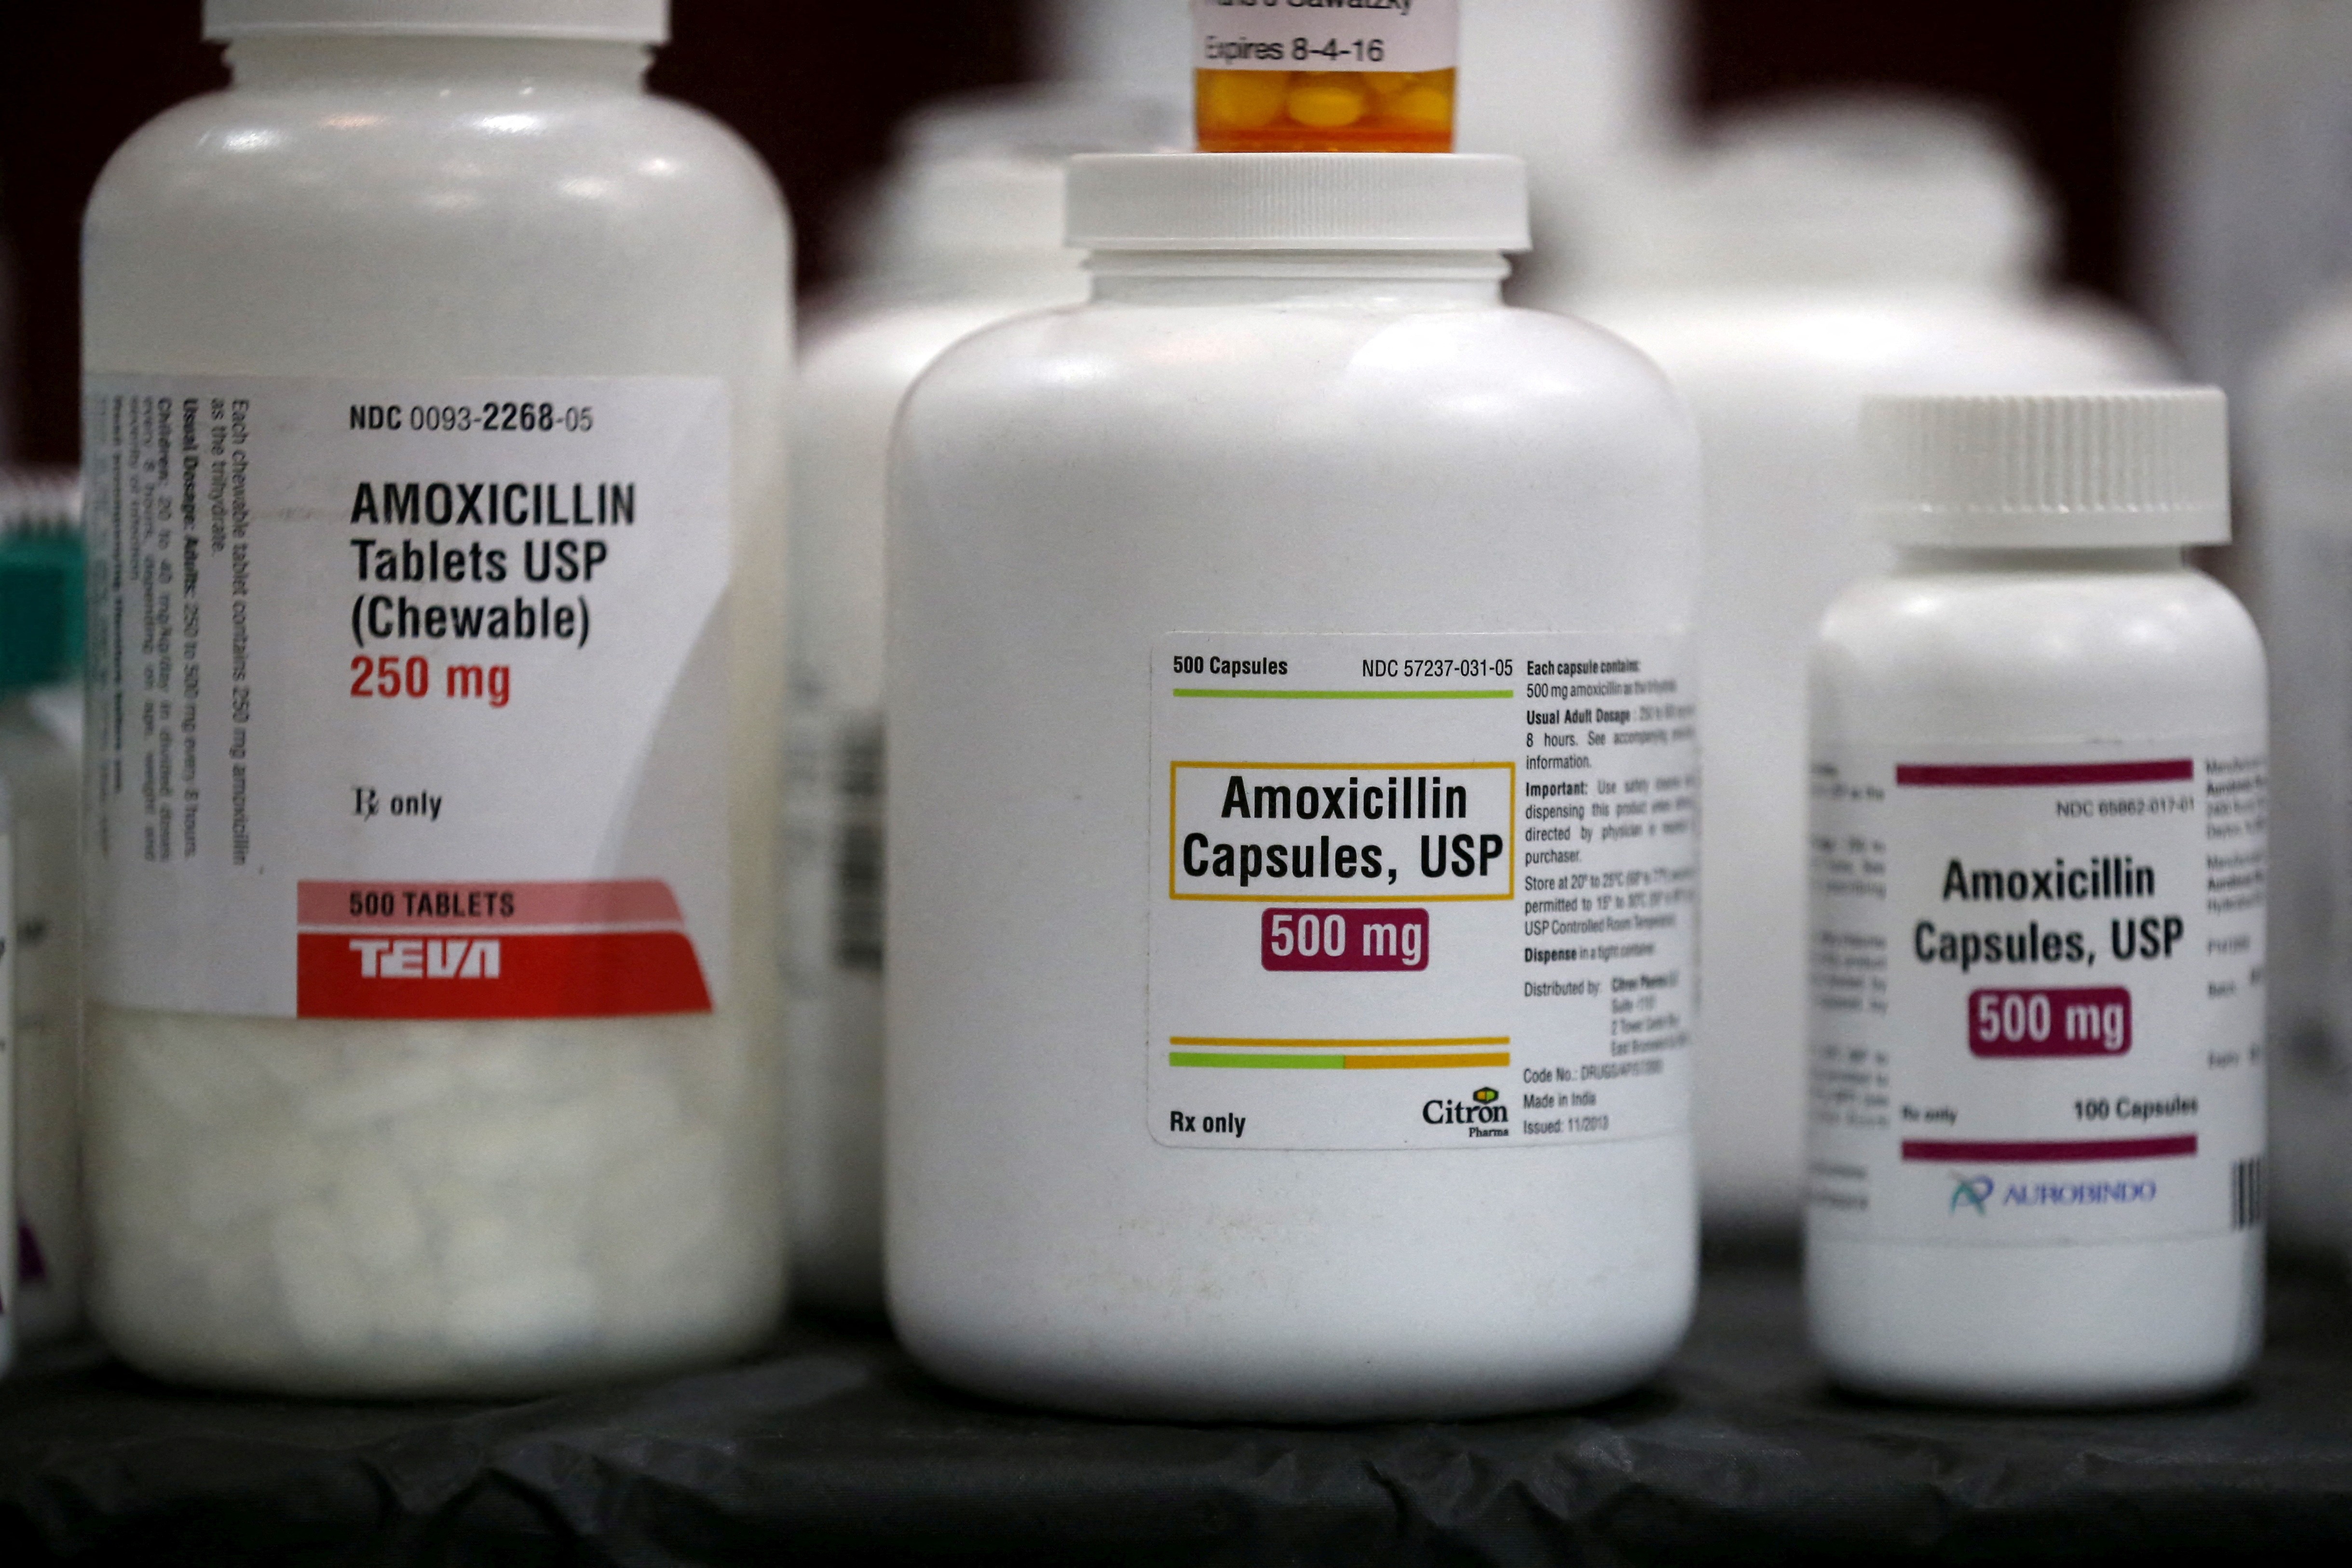 Amoxicillin penicillin antibiotics are seen in the pharmacy at a medical and dental health clinic in Los Angeles